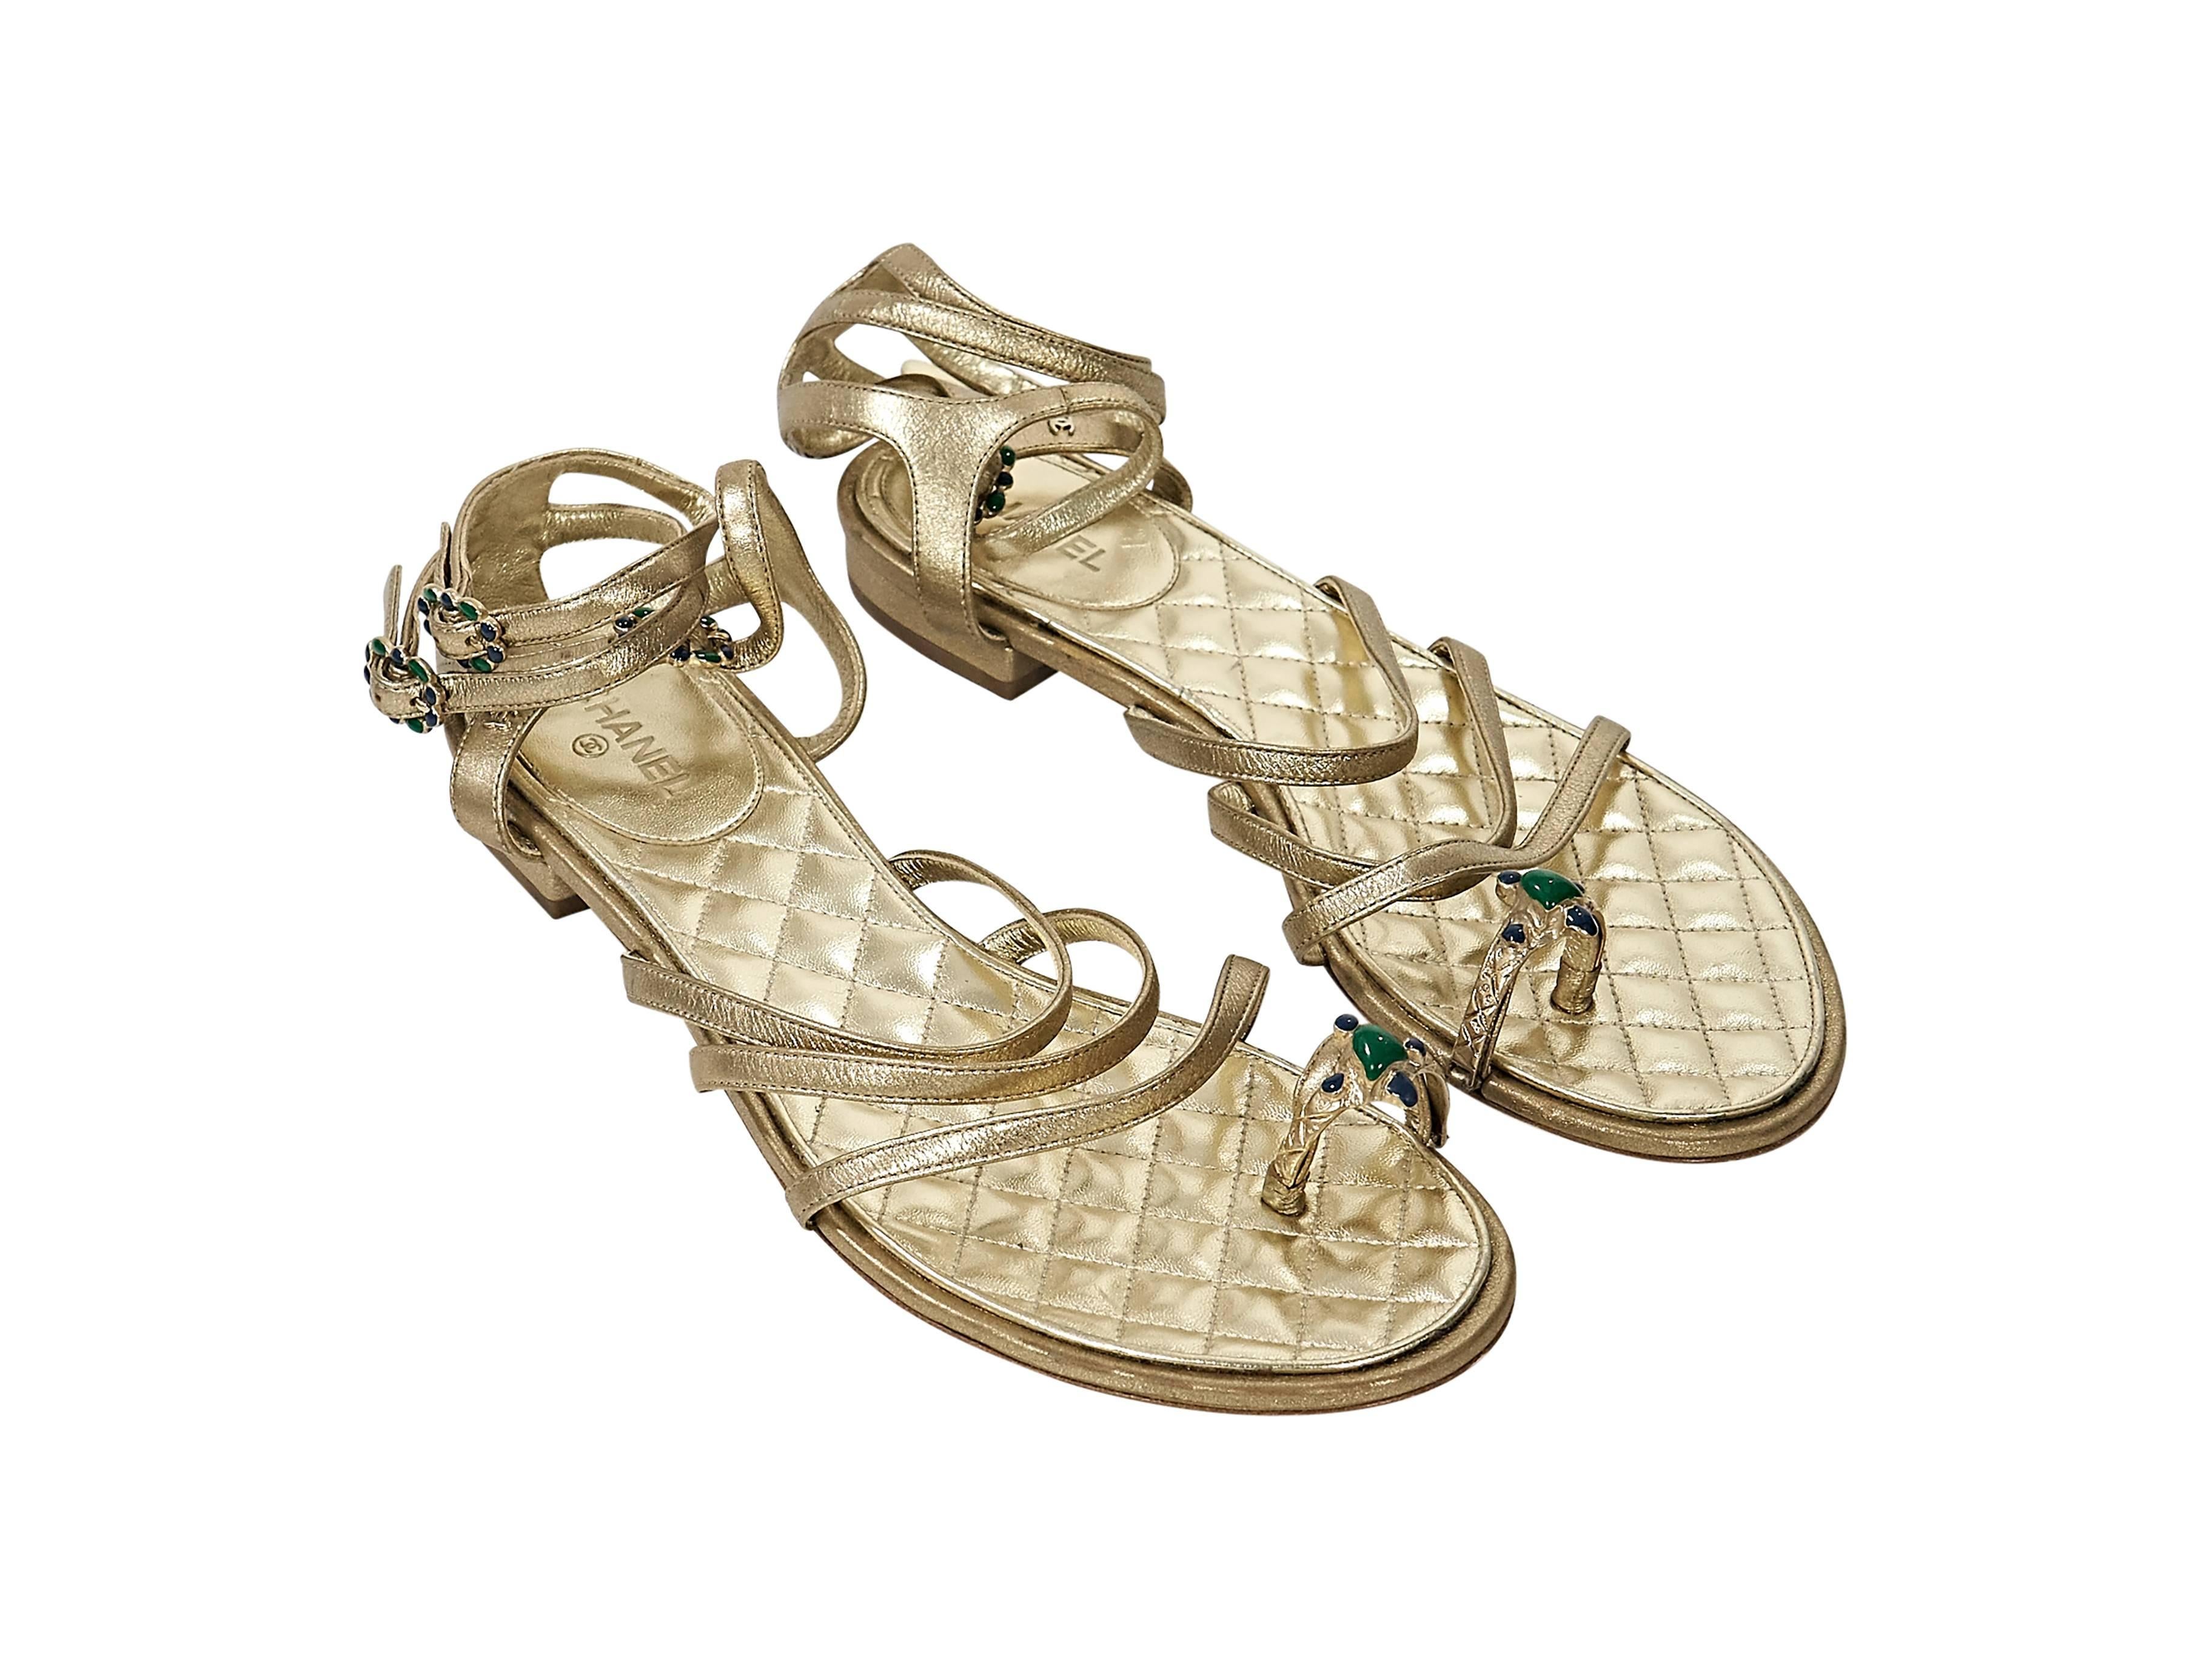 Product details: Gold leather strappy flat sandals by Chanel. Triple adjustable ankle straps. Embellished toe ring. Quilted leather lining.
Condition: Very good. 